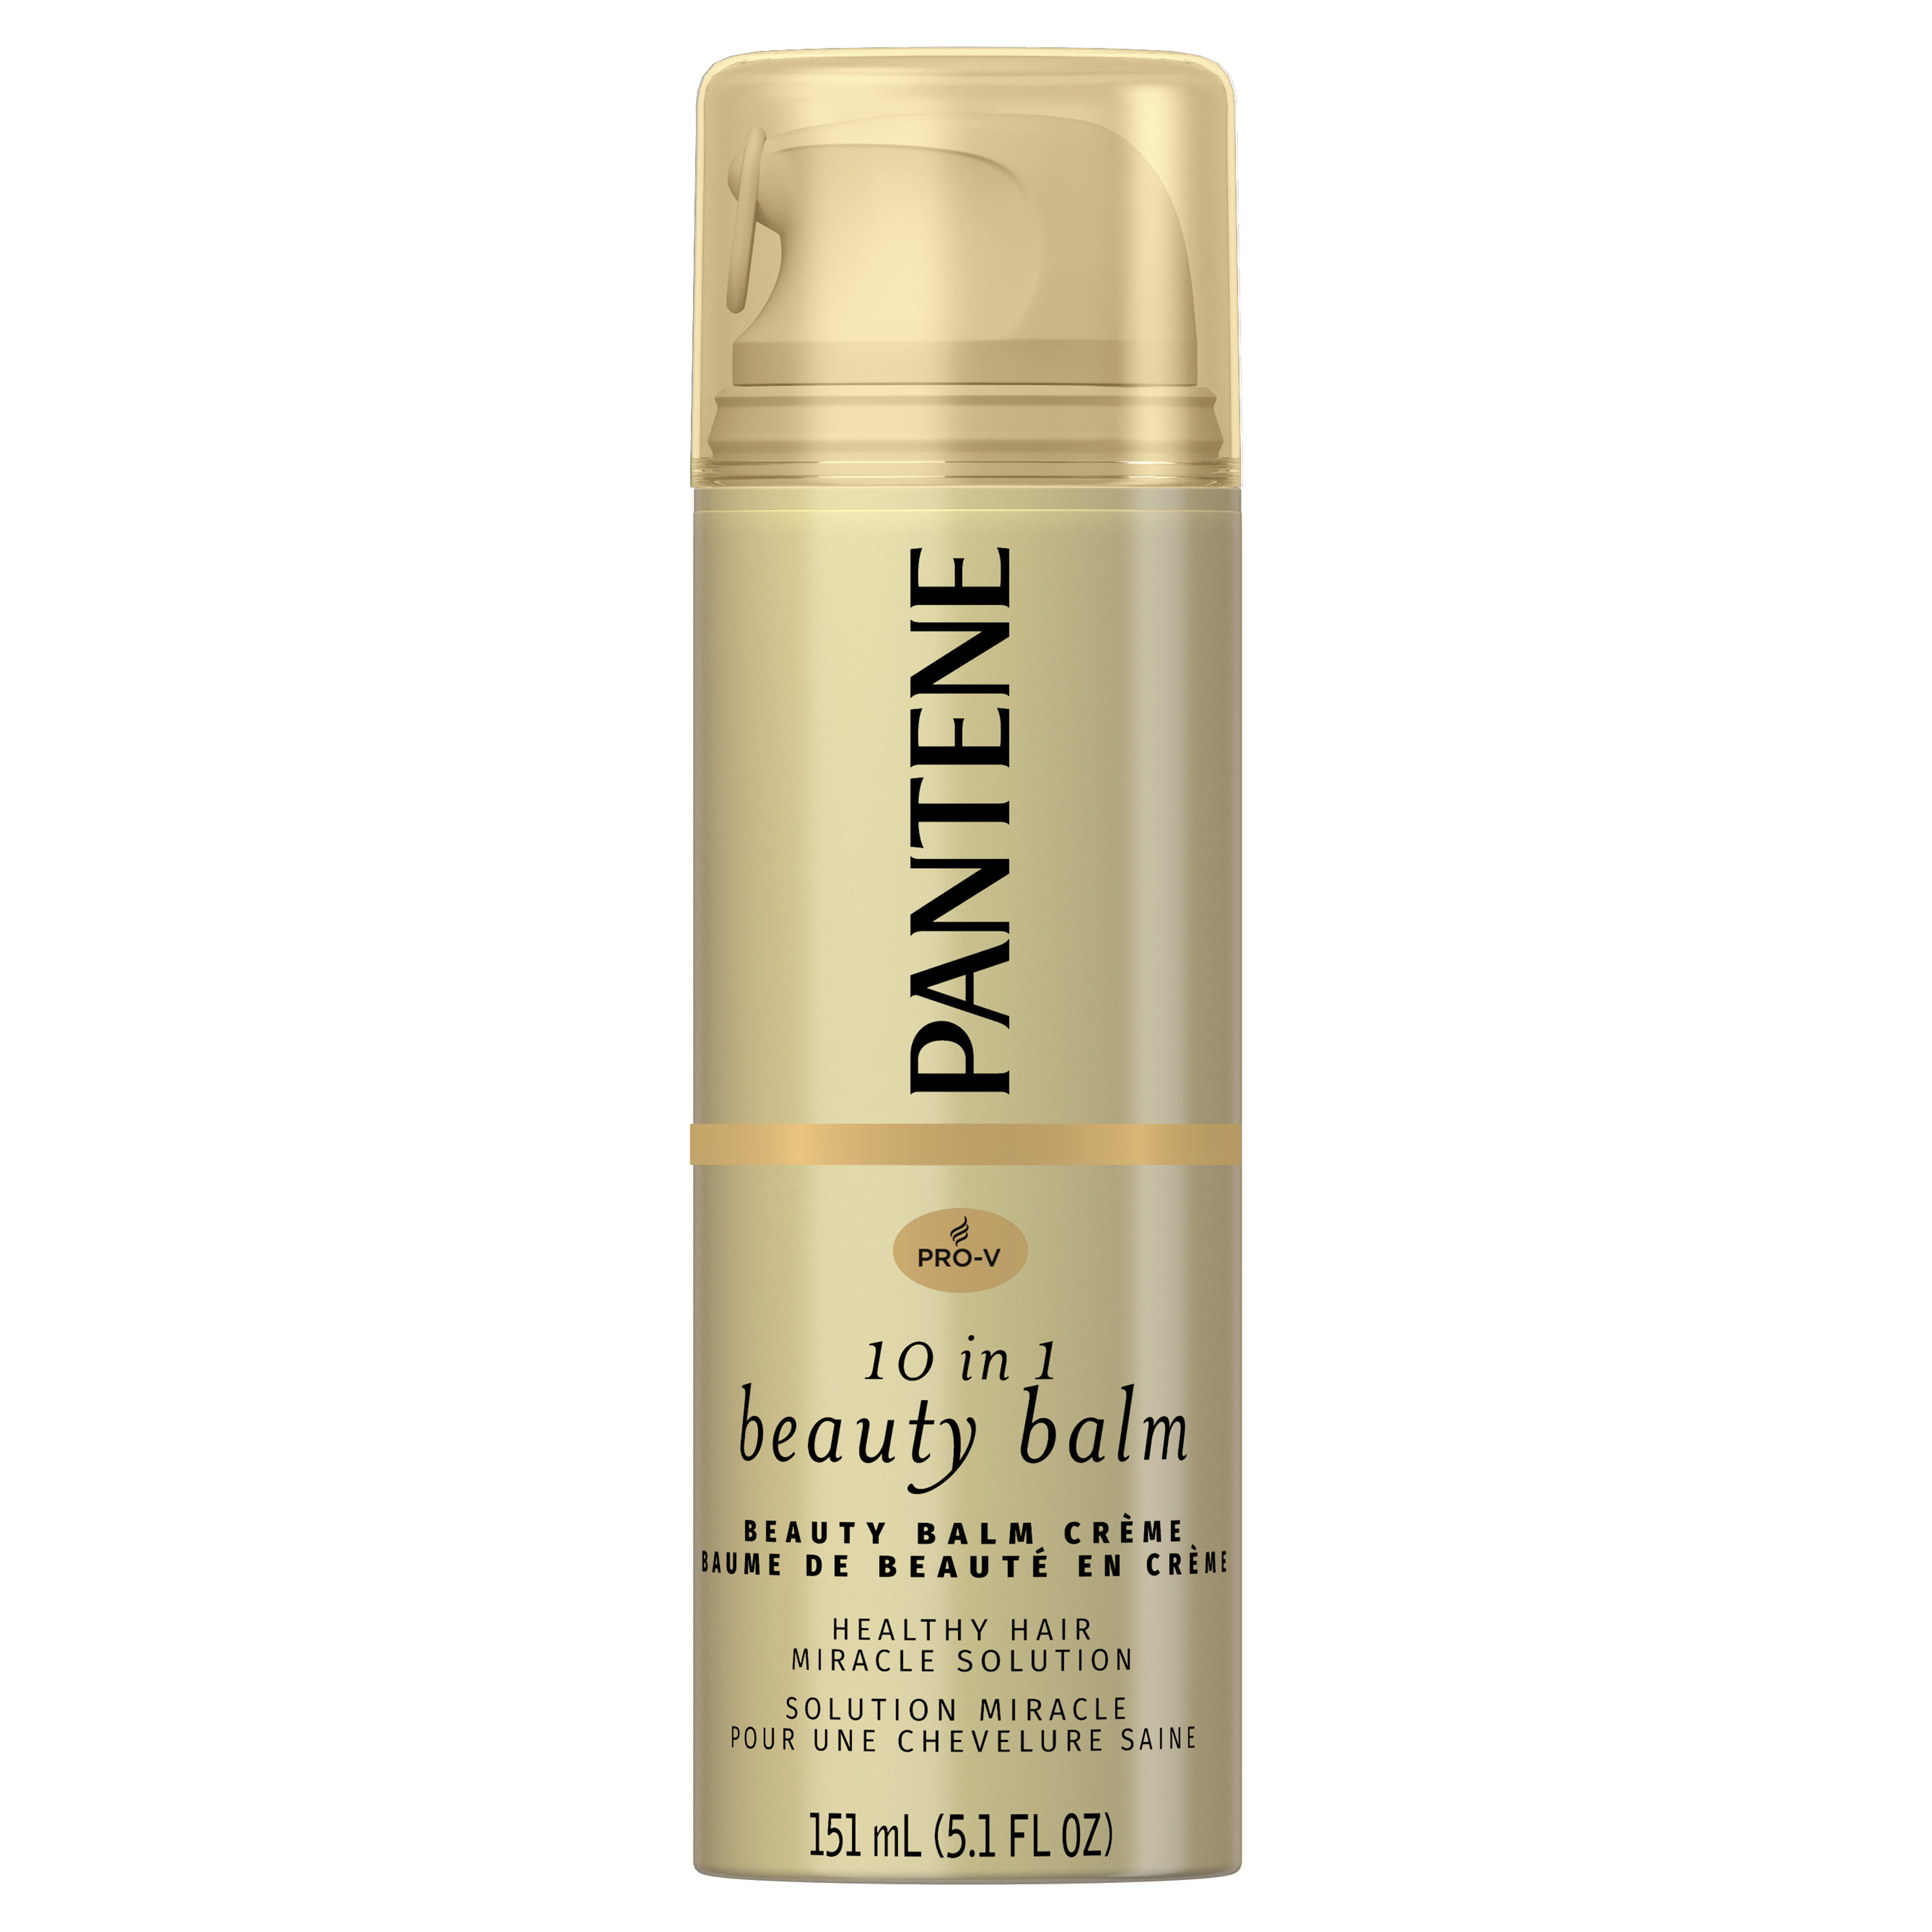 Pantene Pro-V Nutrient Boost 10 in 1 Beauty for Softness, Strength and Shine, 5.1 fl oz - image 1 of 7